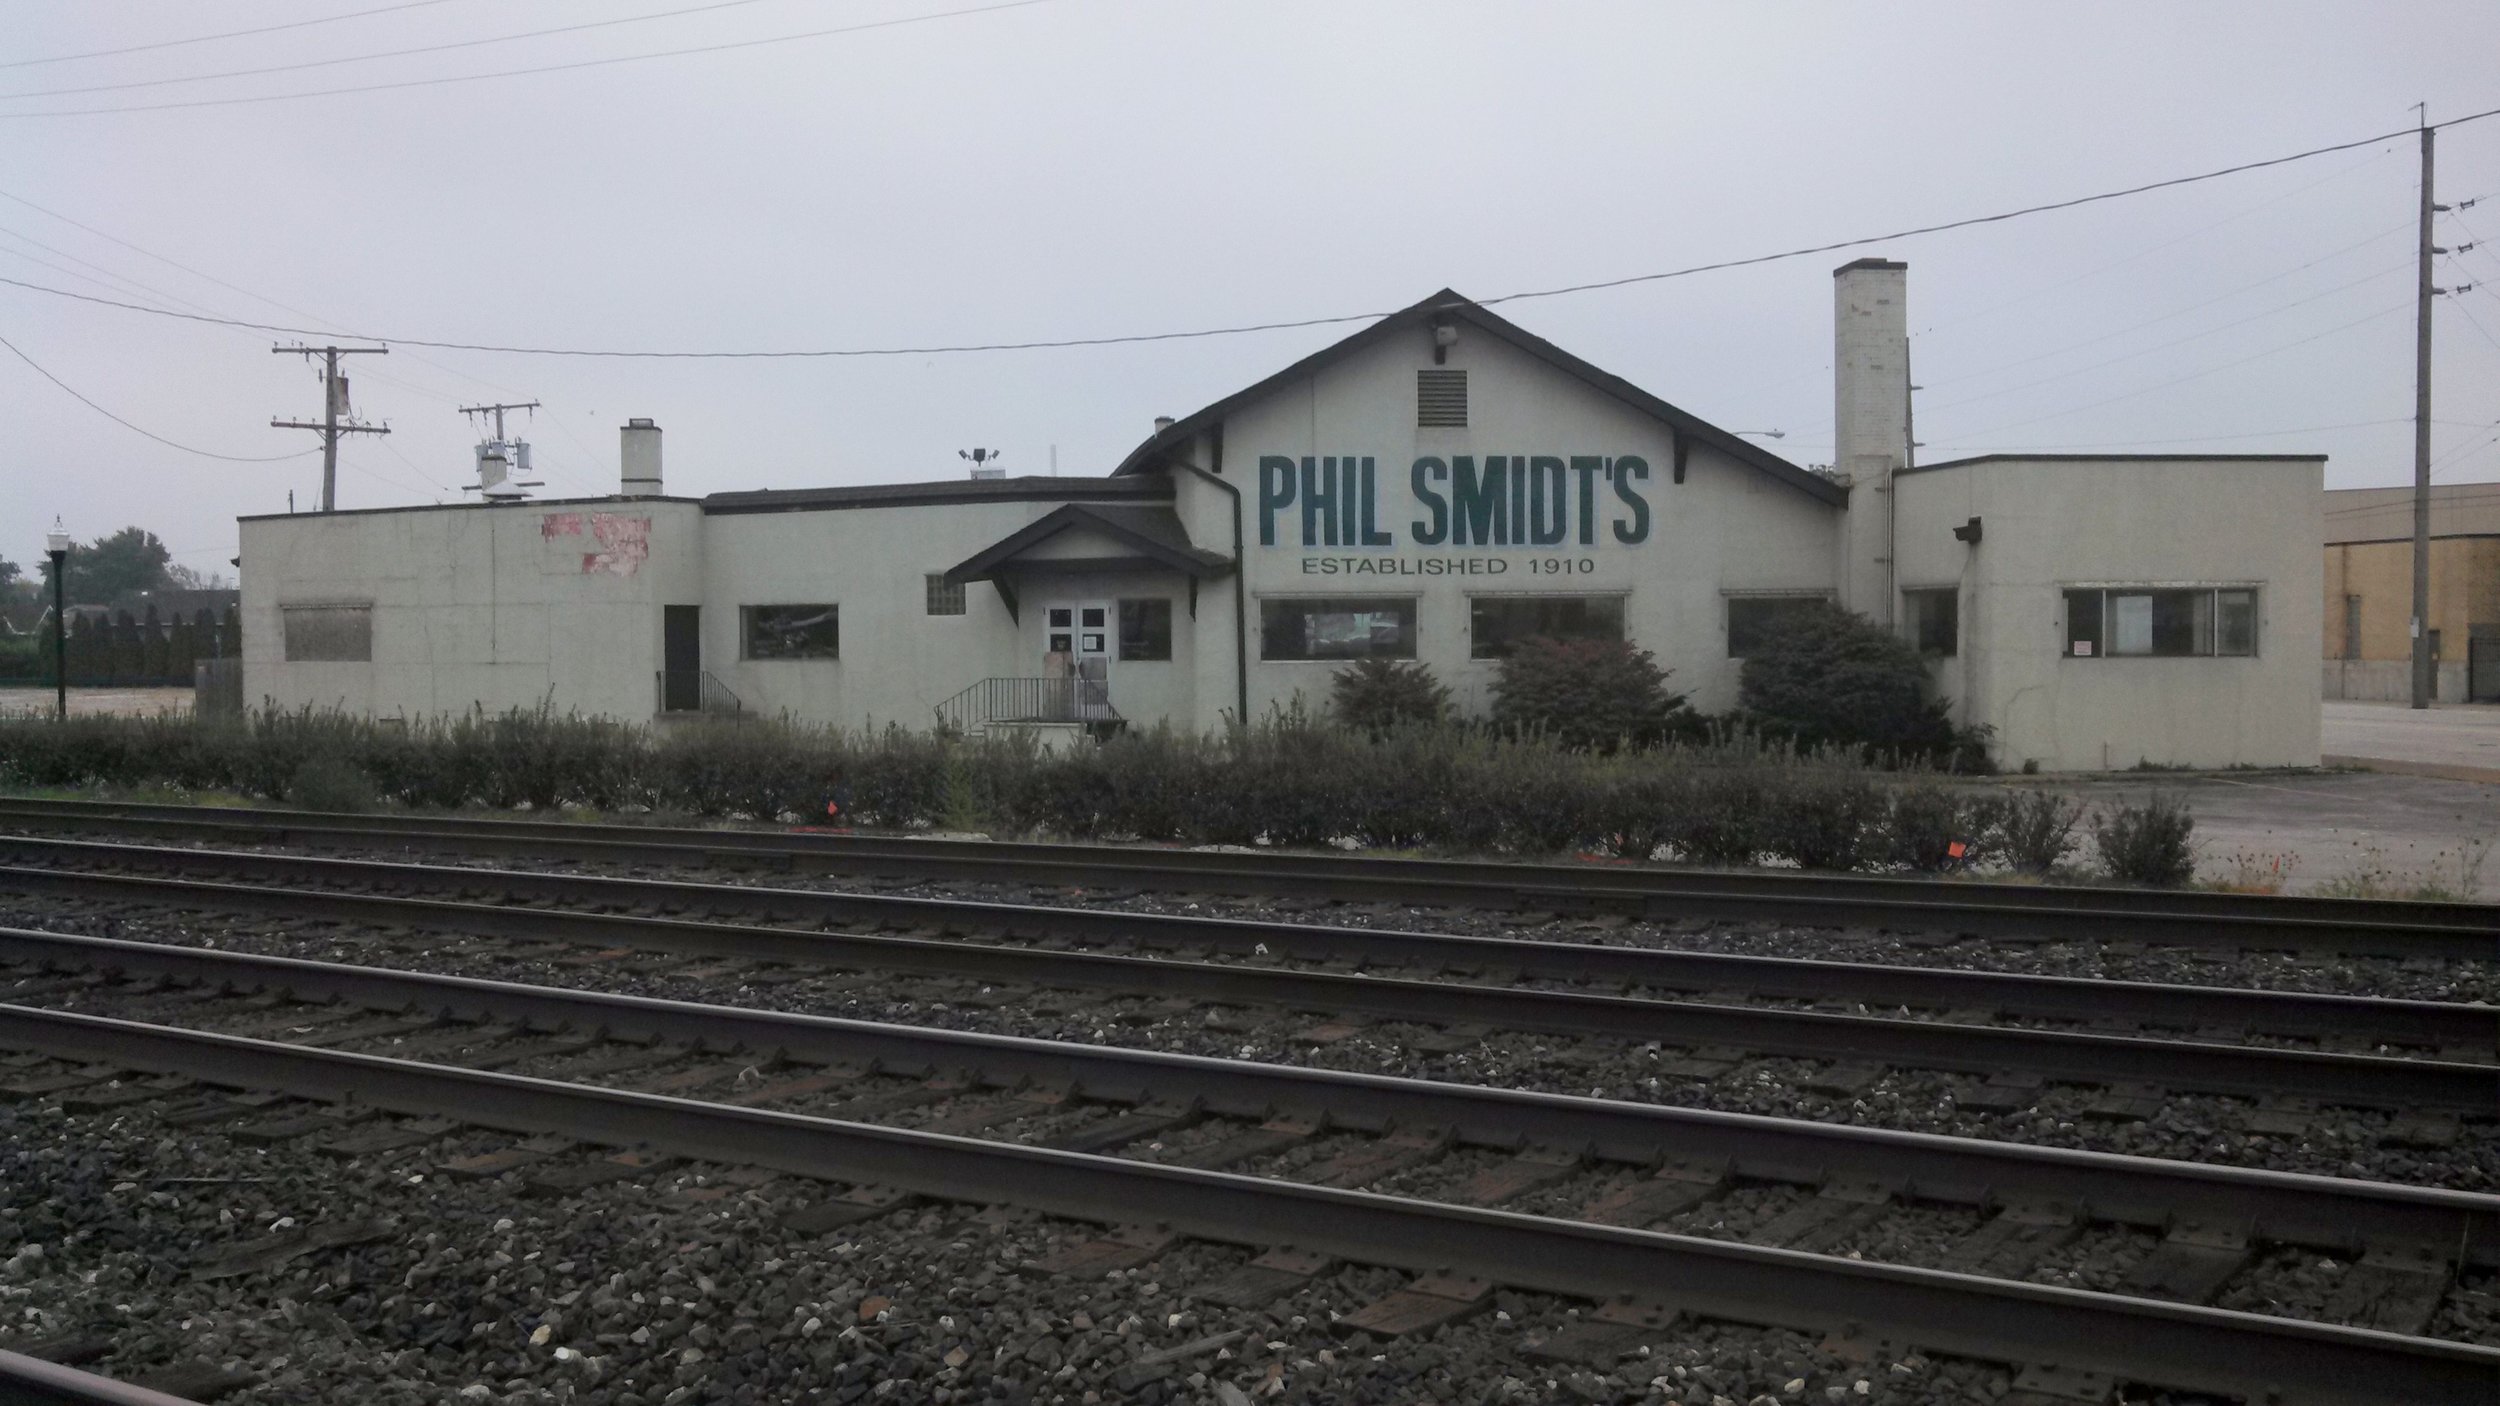 Phil Smidts stood at the far north end of Calumet Avenue across from the railroad tracks This photo was from October 2013 six years after the restaurant closed The building was demolished in 2014